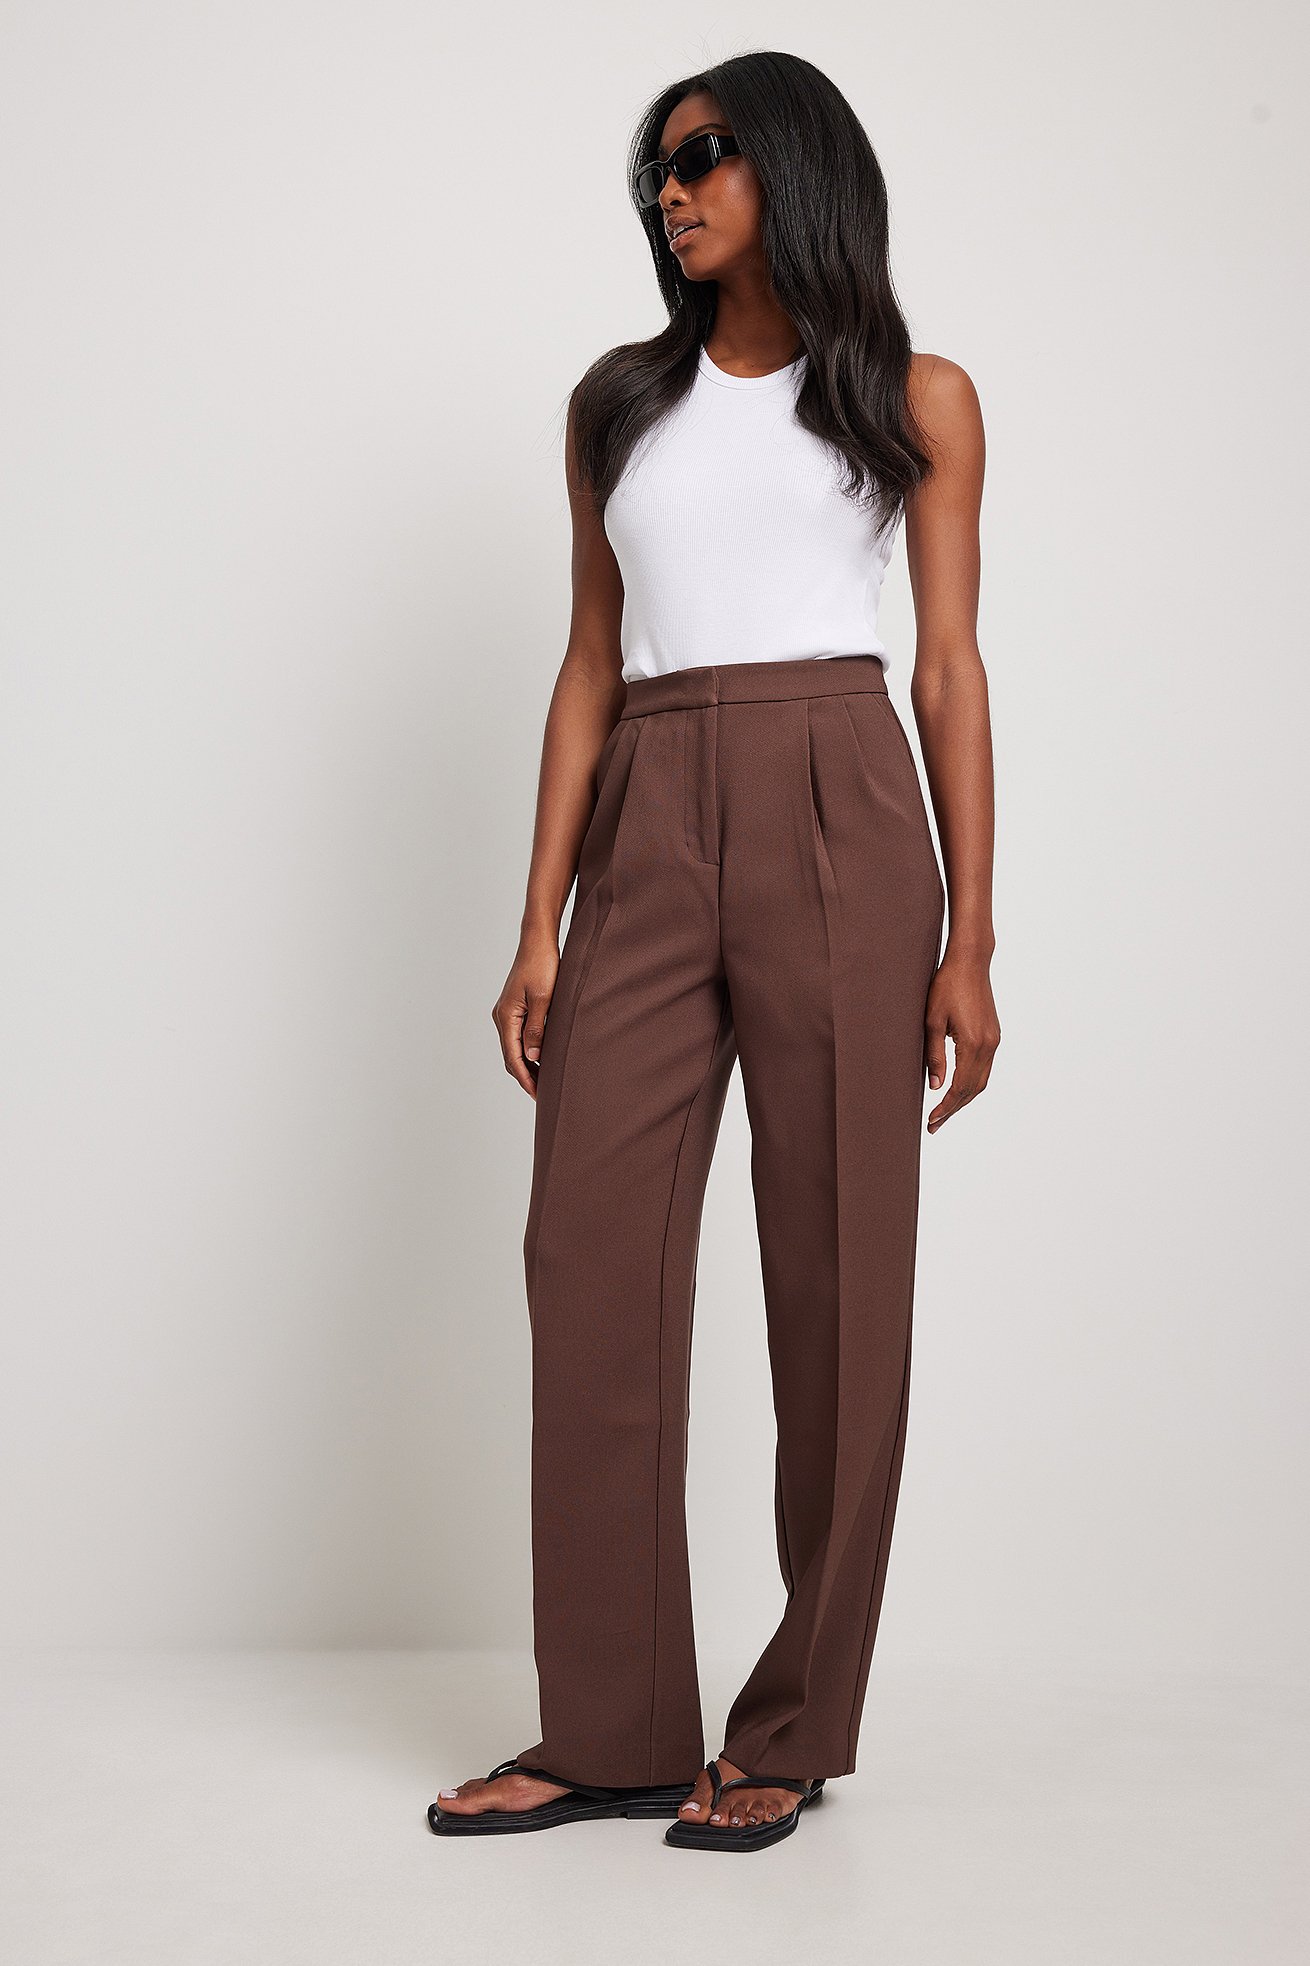 High Waist Deep Pleated Suit Pants Outfit.